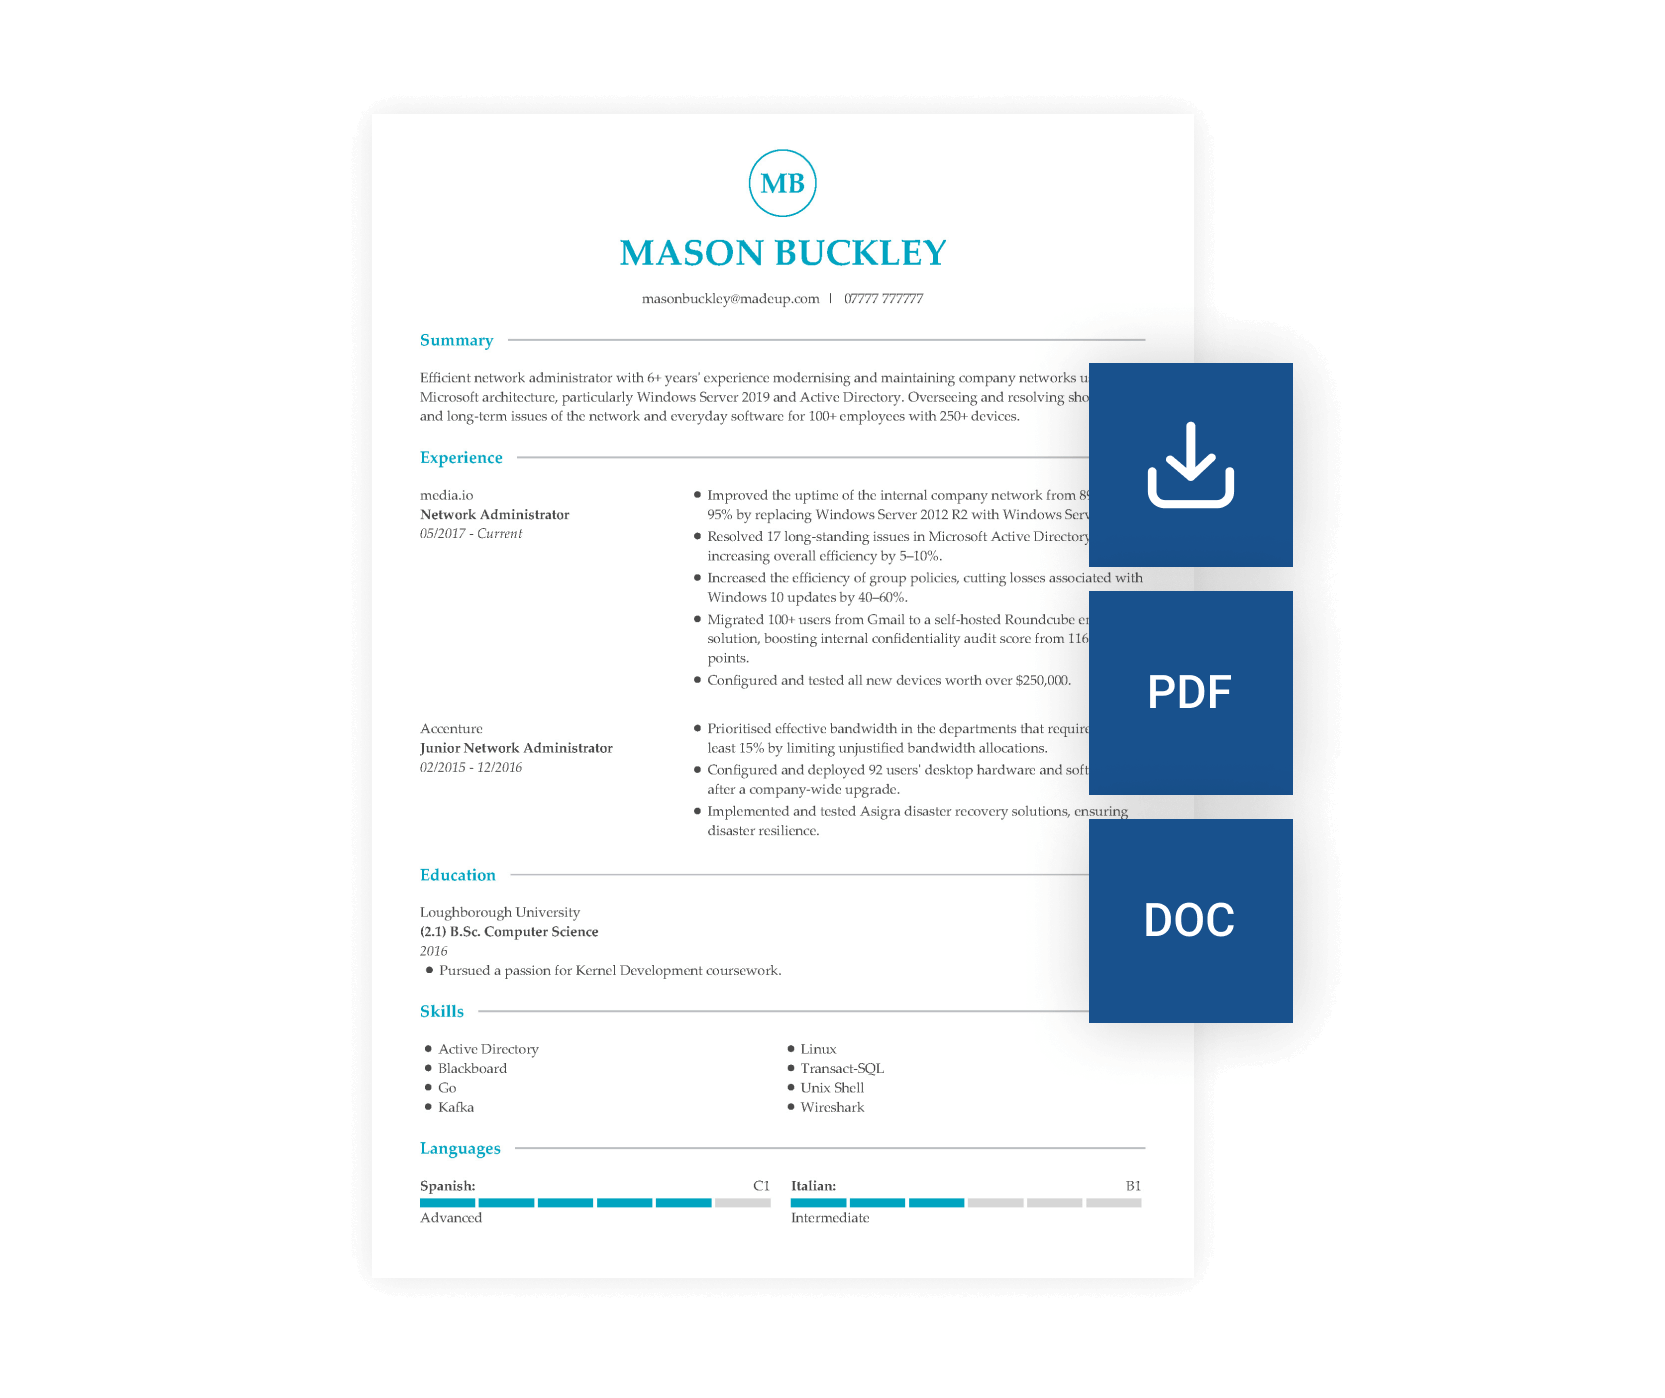 Build a CV online and download it as a PDF or DOC